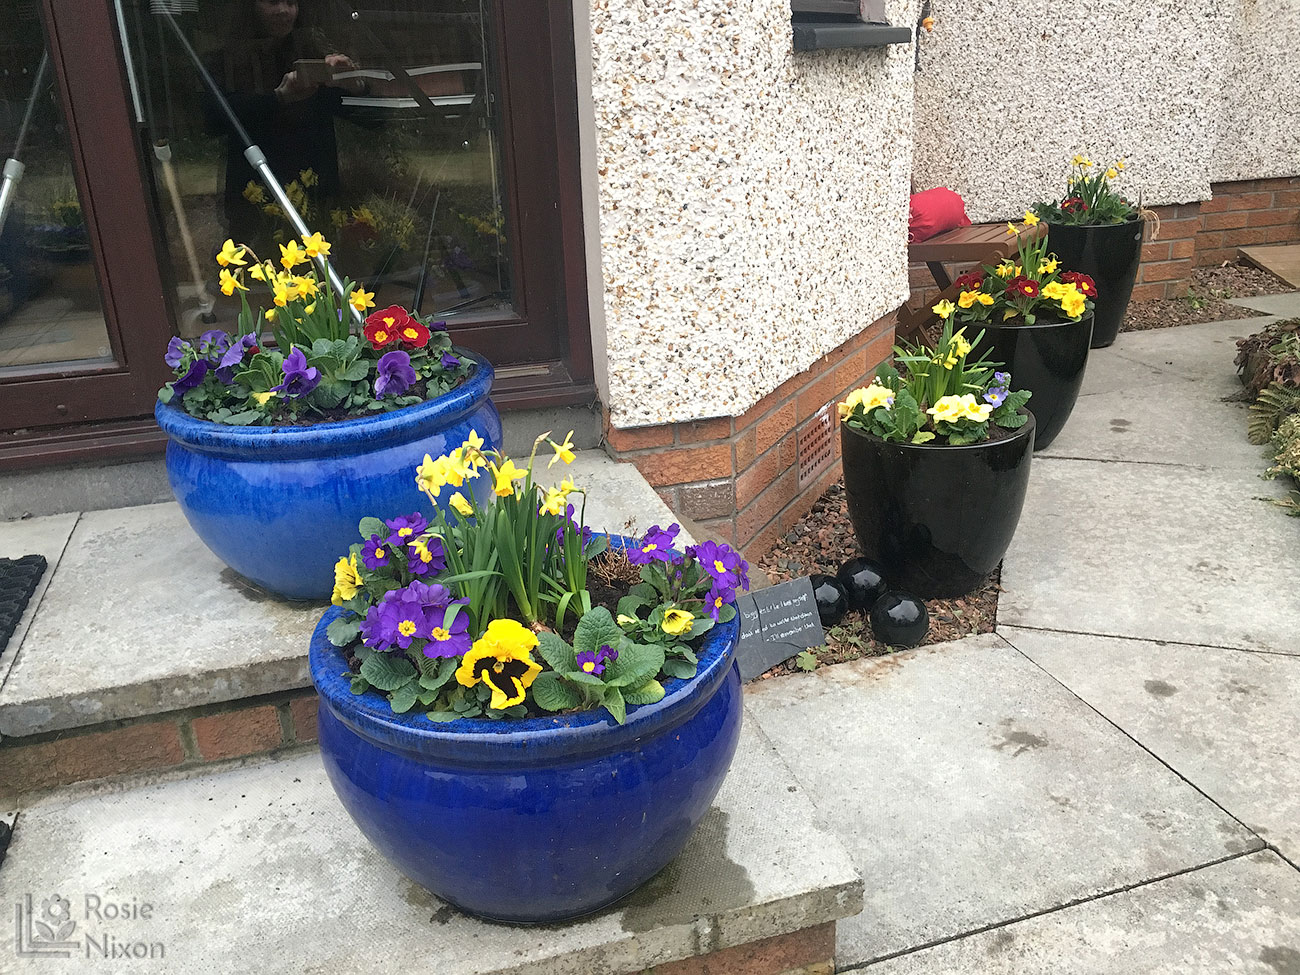 daffodils, primroses and pansies in planted containers 